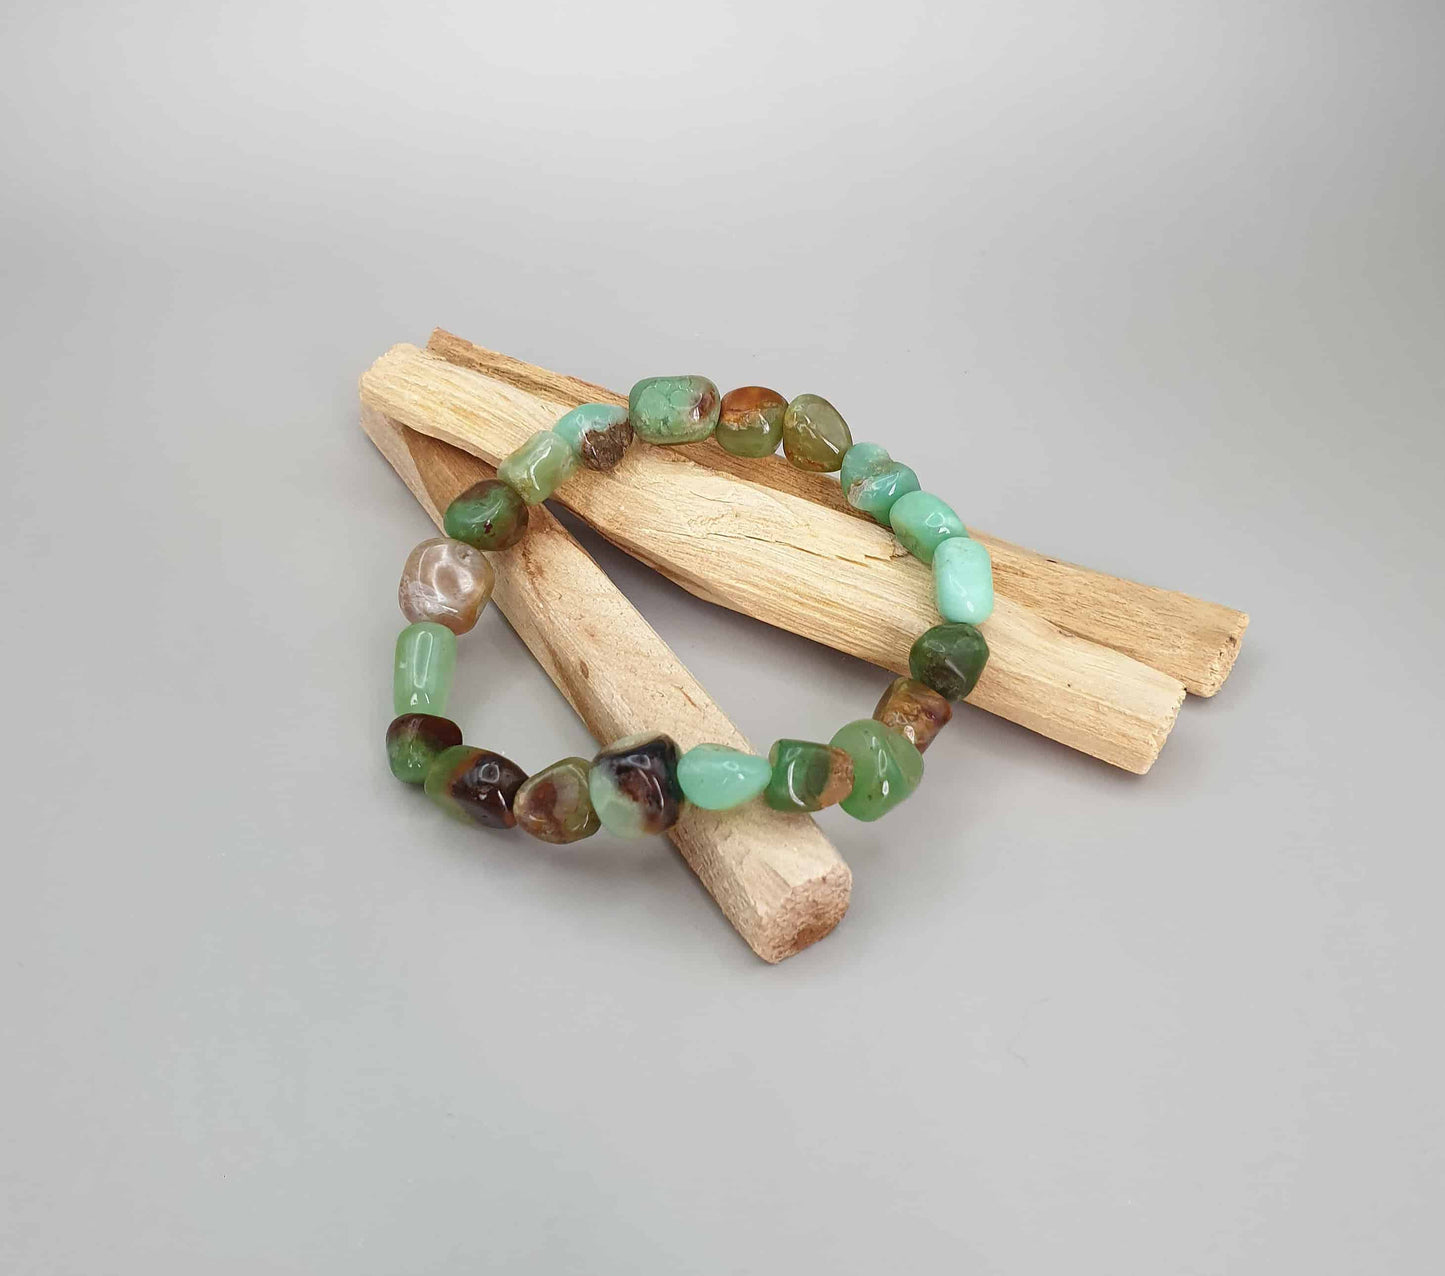 Chrysoprase can assist with bringing empathy, forgiveness, growth and self love into your life. It is believed to be a stone of good fortune and prosperity.  Beads measure 8/10mm Circumference is approximately 6.5 inches. Bracelet is elasticated